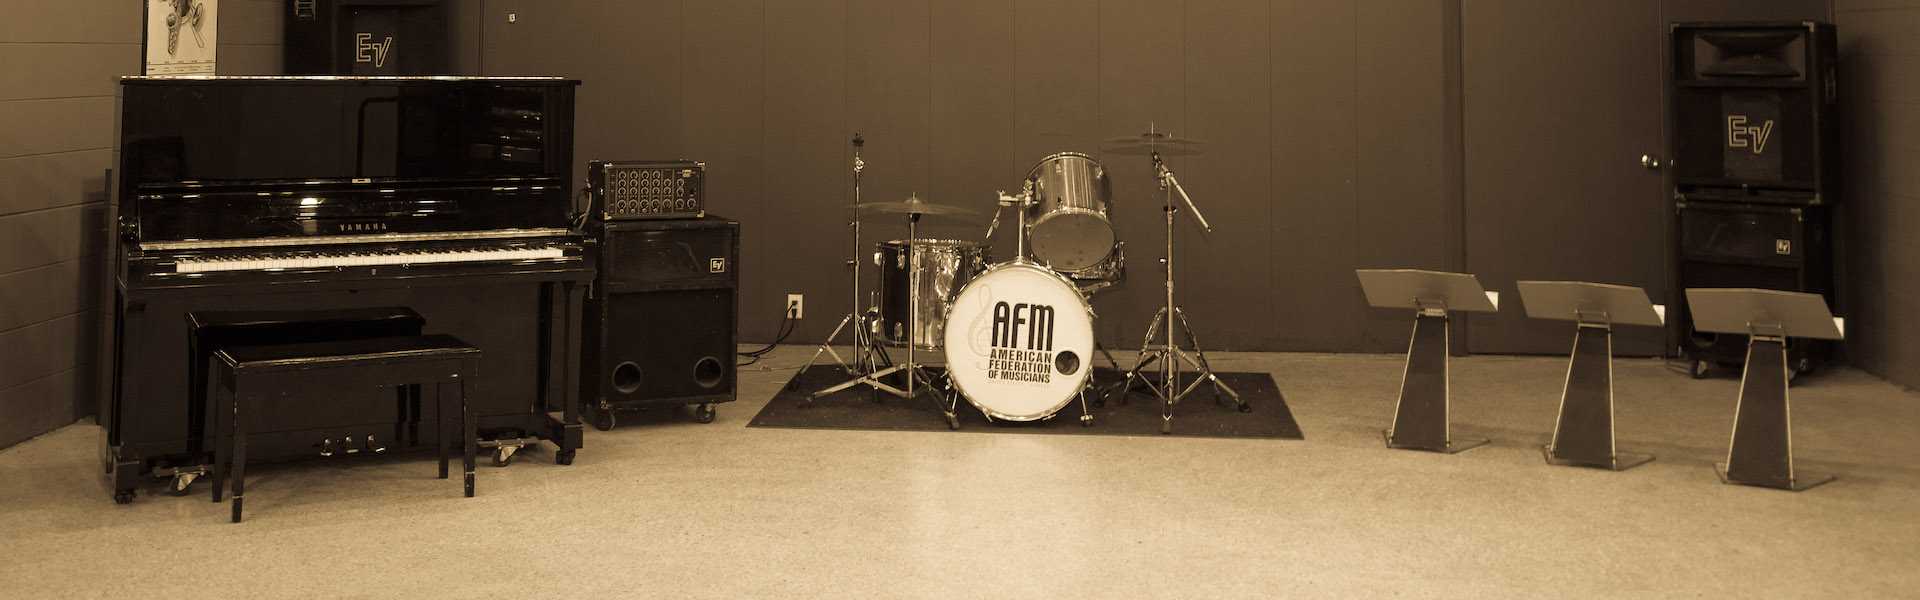 Central Florida Musicians' Association Rehearsal Hall Drums